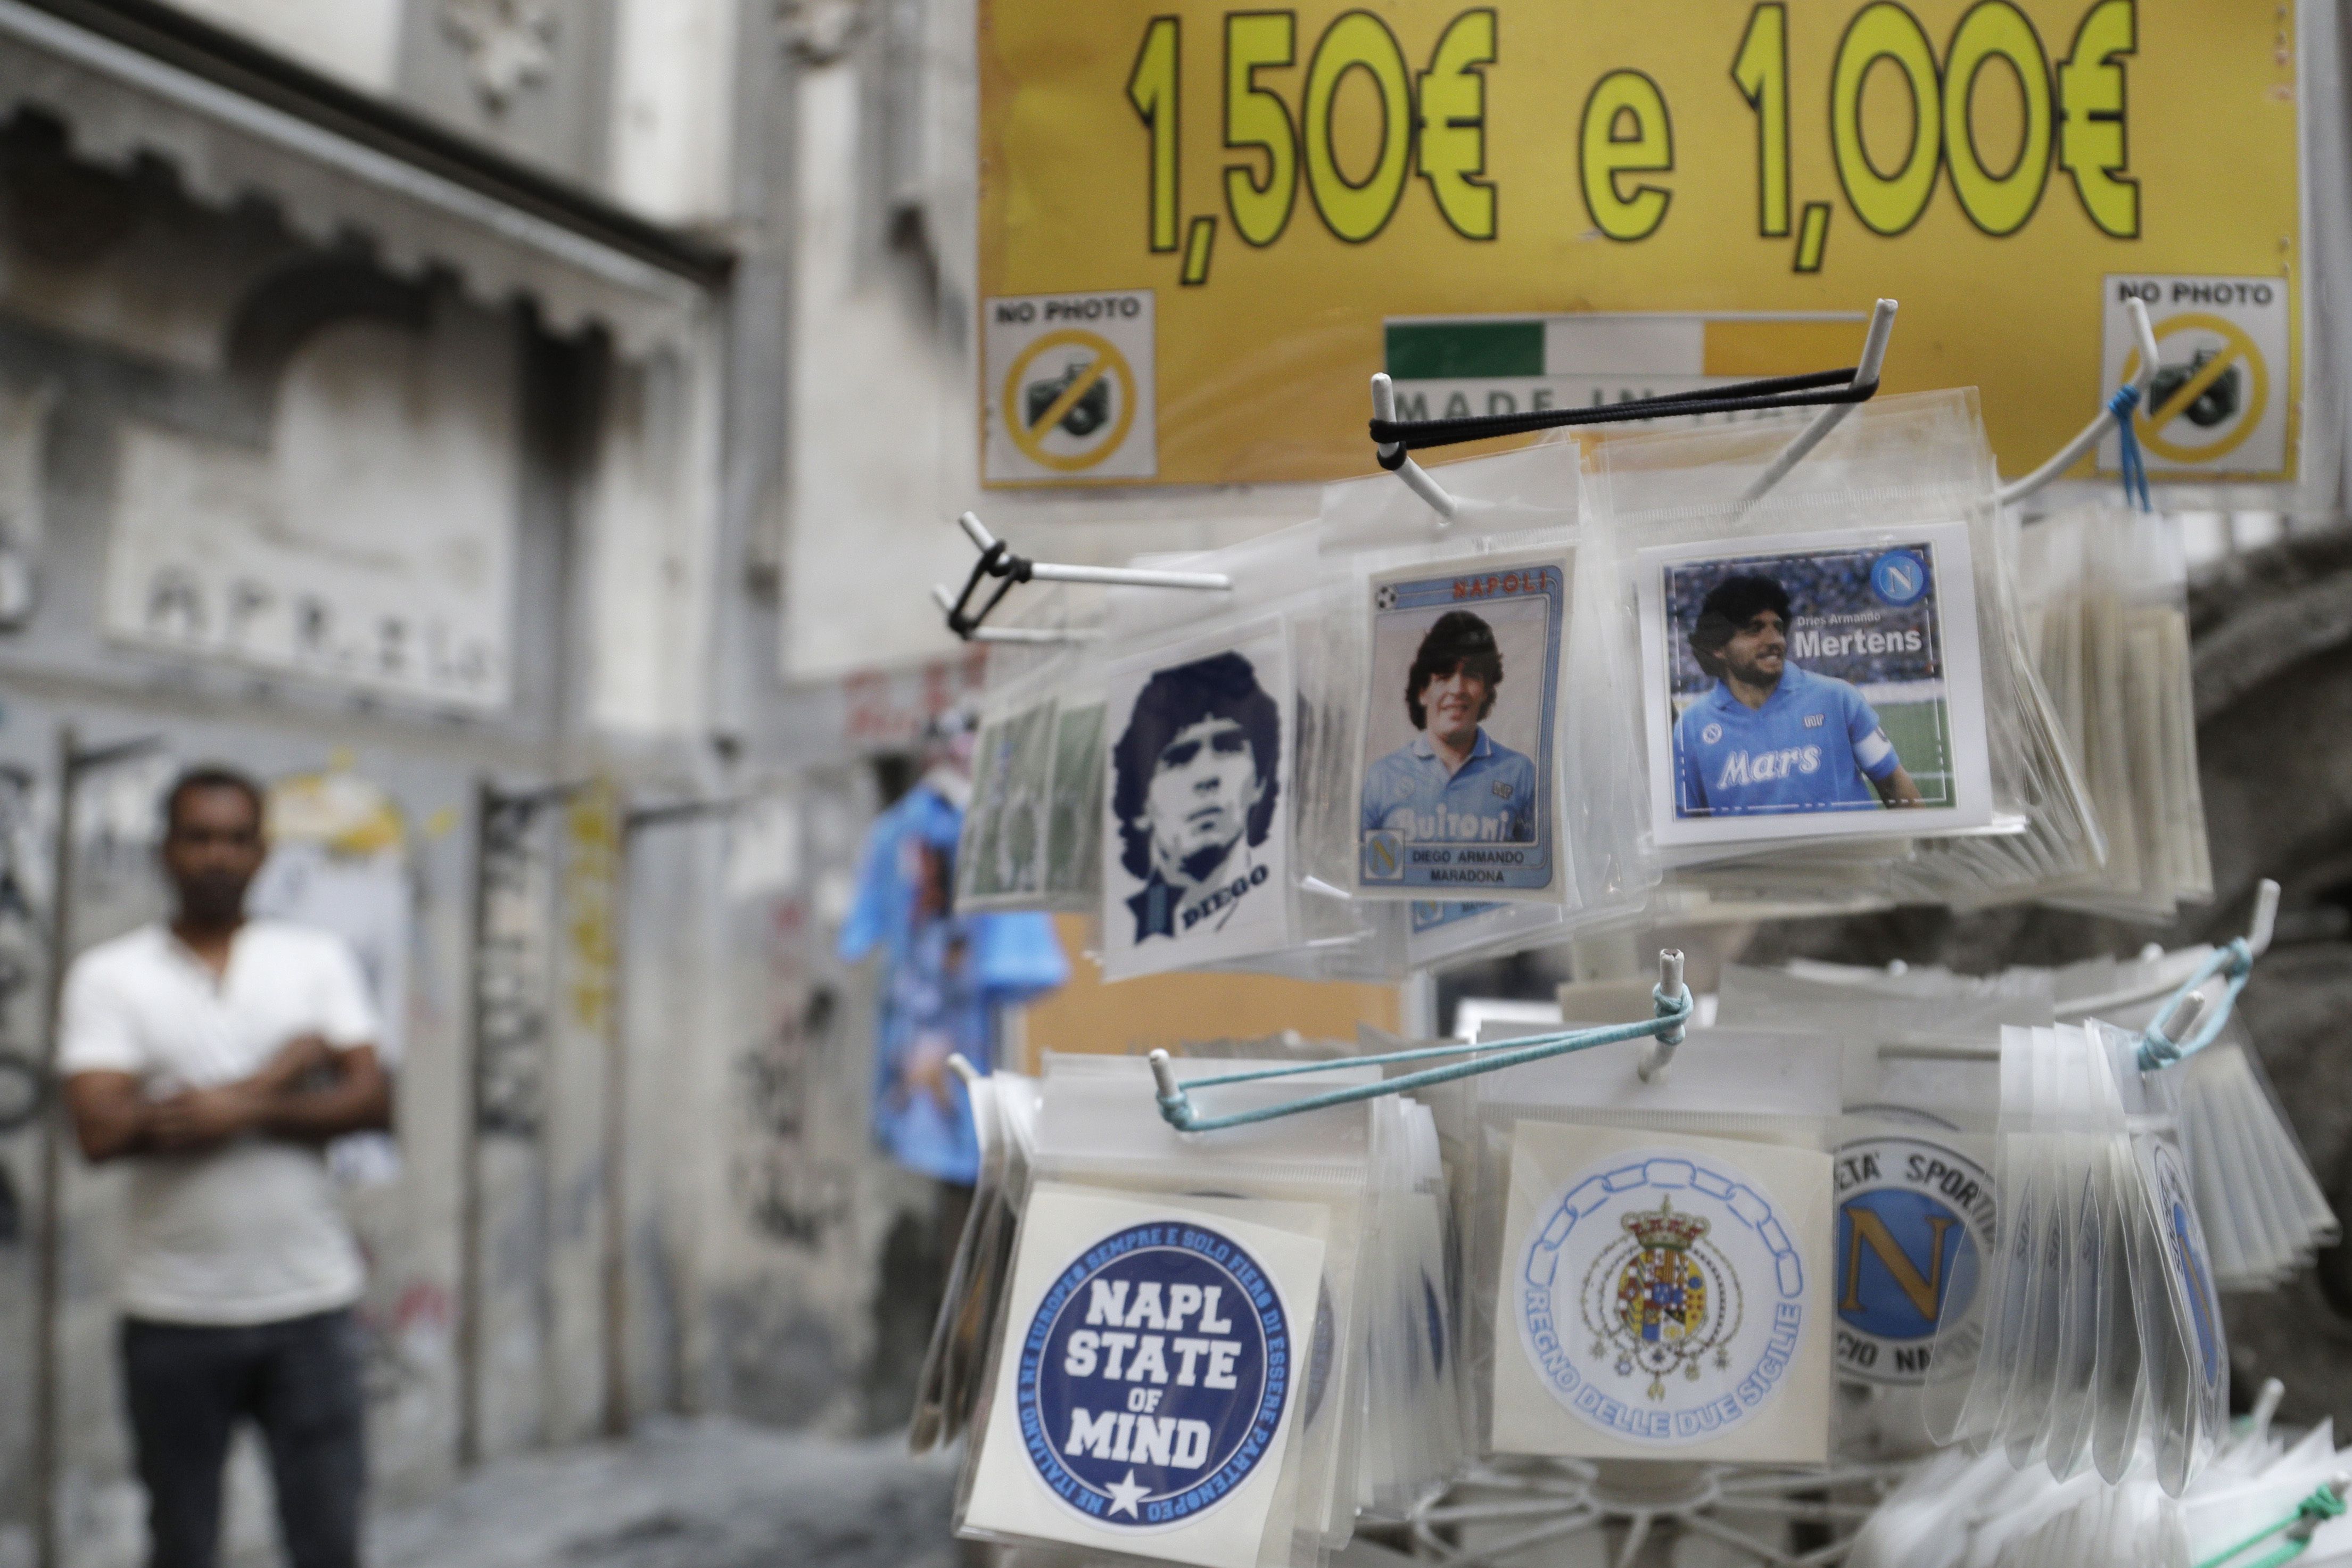 Diego Maradona Is a Self-Confessed Cheat—Why Does Naples Think He's a  Saint? - WSJ